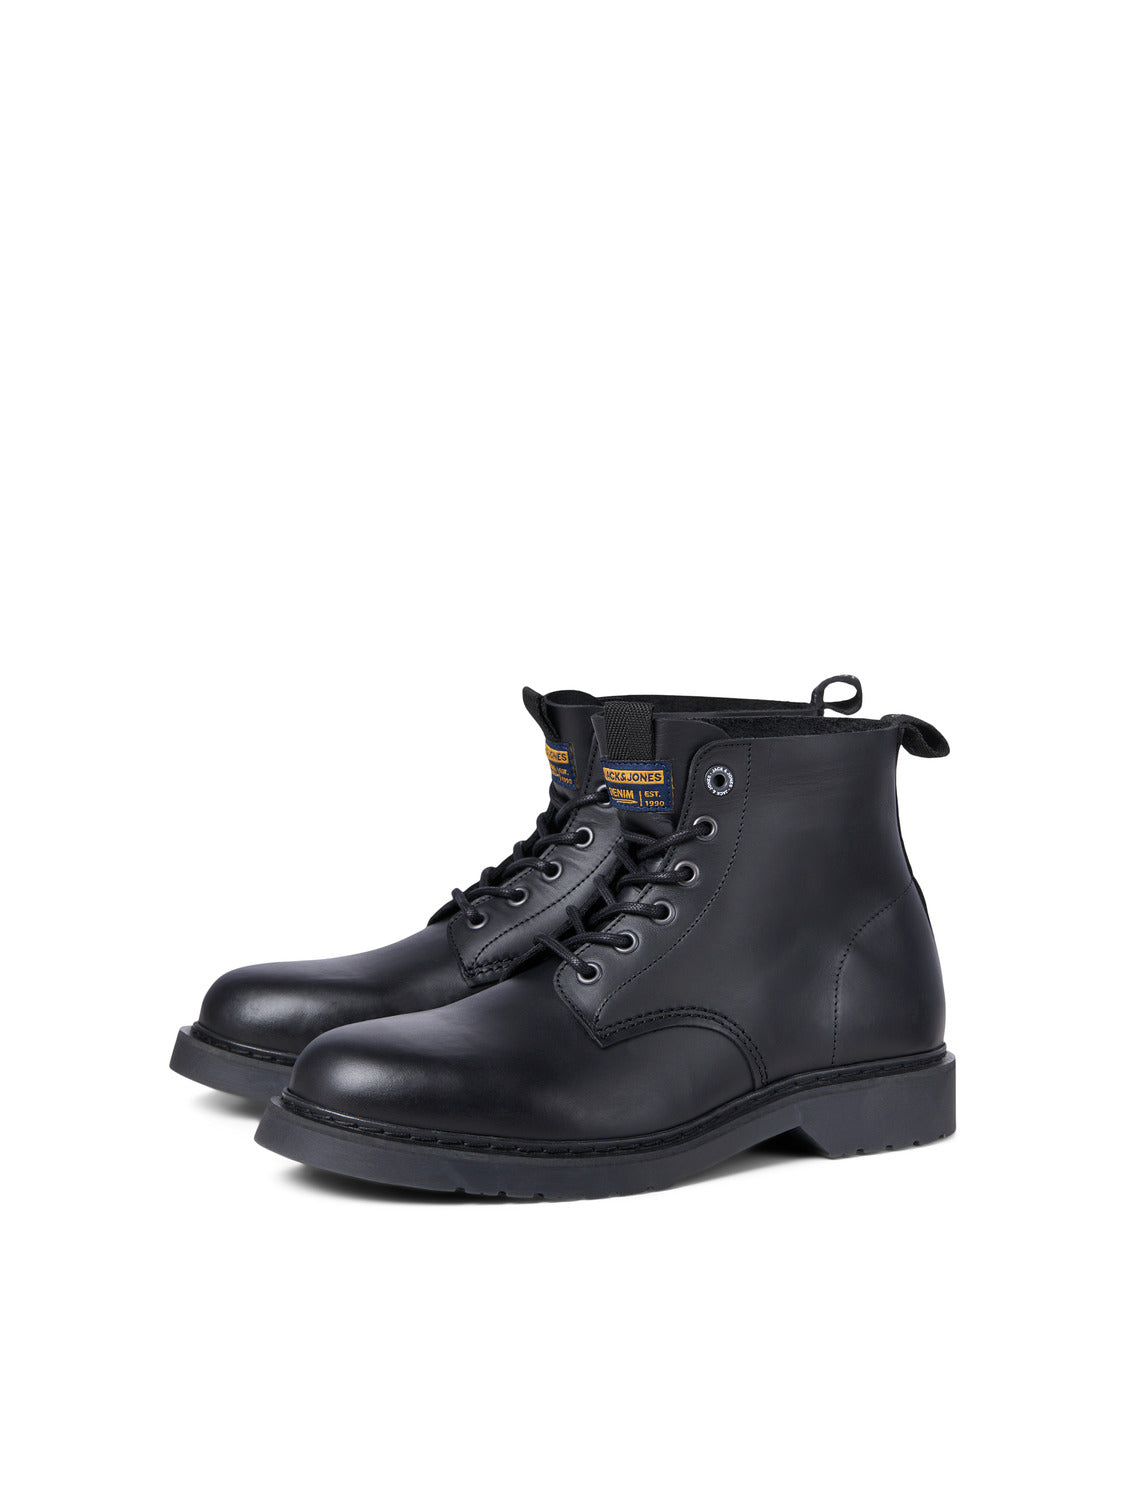 JFWHASTINGS Boots - Anthracite